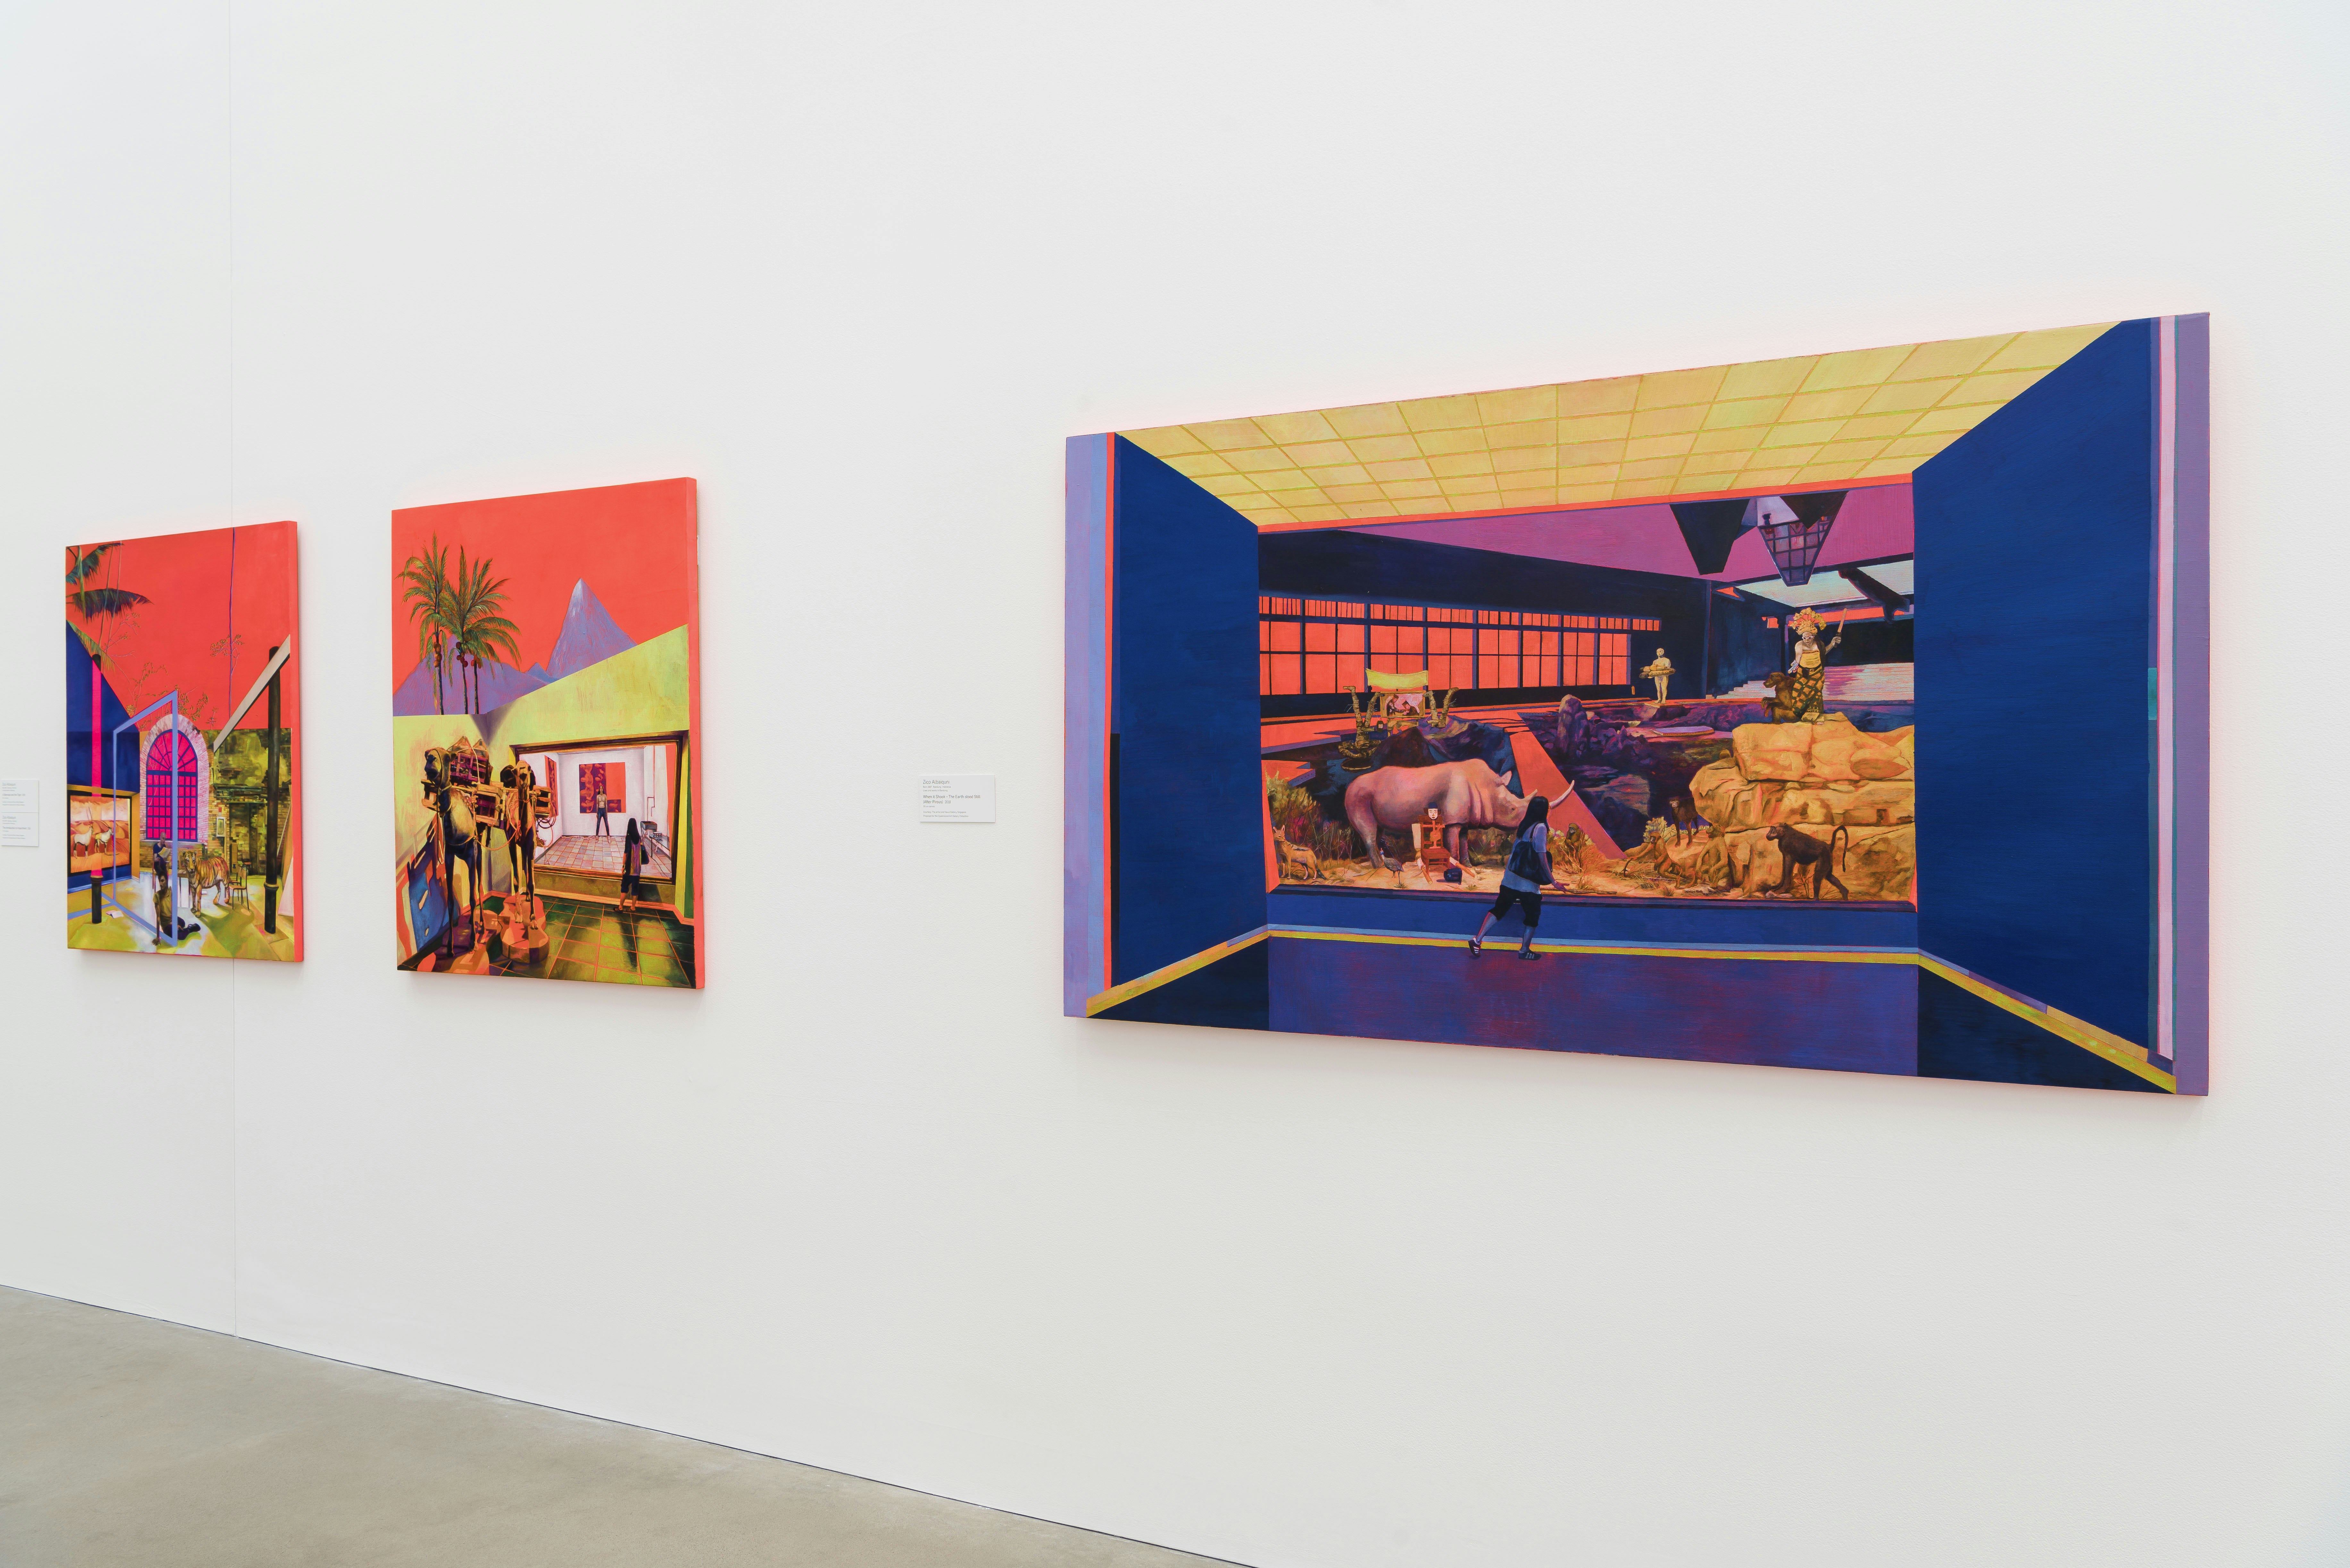 Three paintings hanging on a gallery wall at QAGOMA: the two left paintings show a tropical architectural space under a bright orange sky, while the right painting shows a figure looking at animals in a reflective blue-walled space.